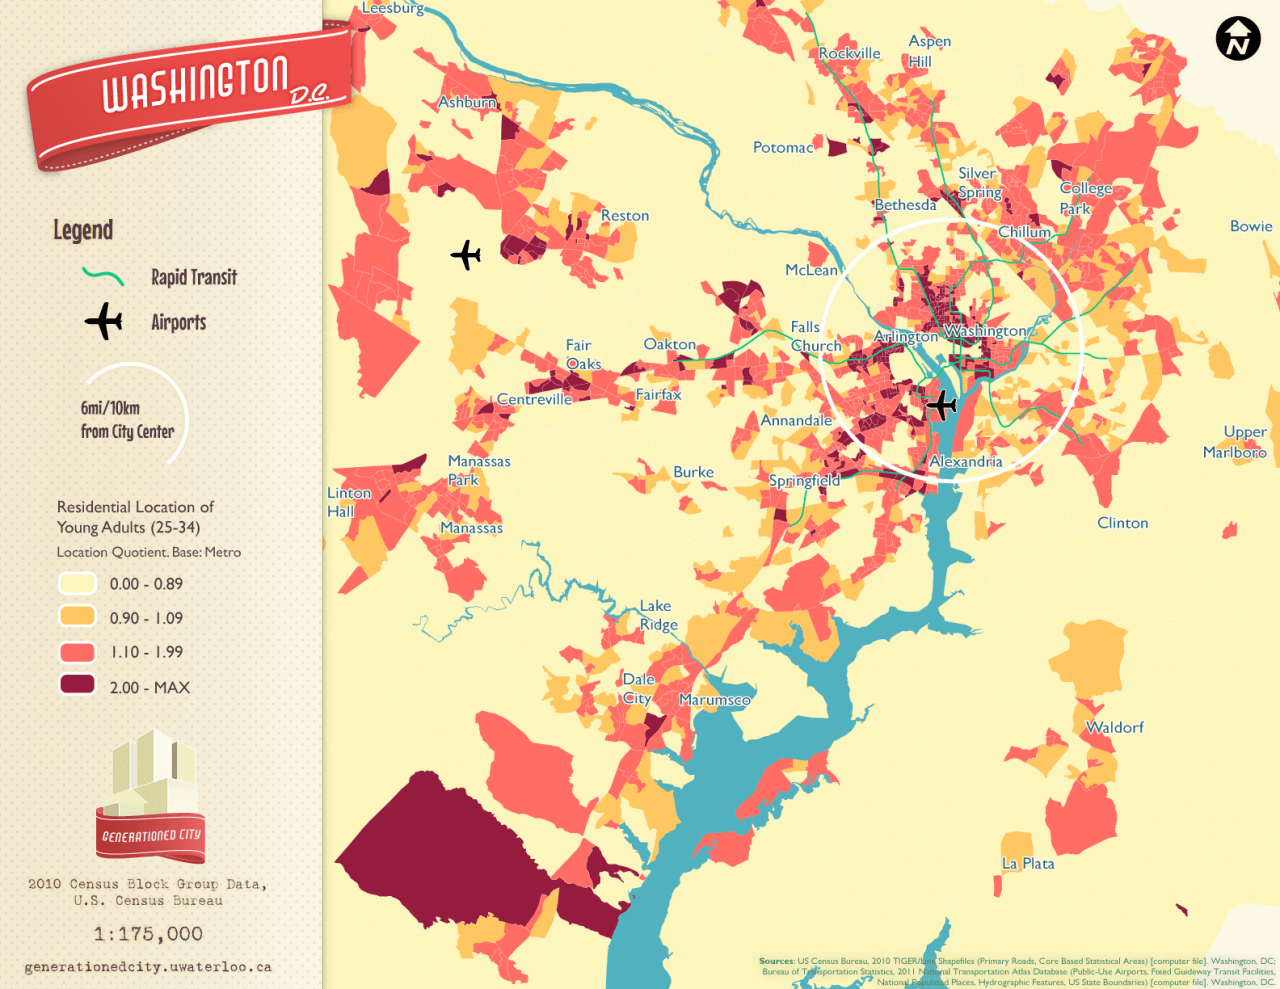 Residential location of young adults in Washington.